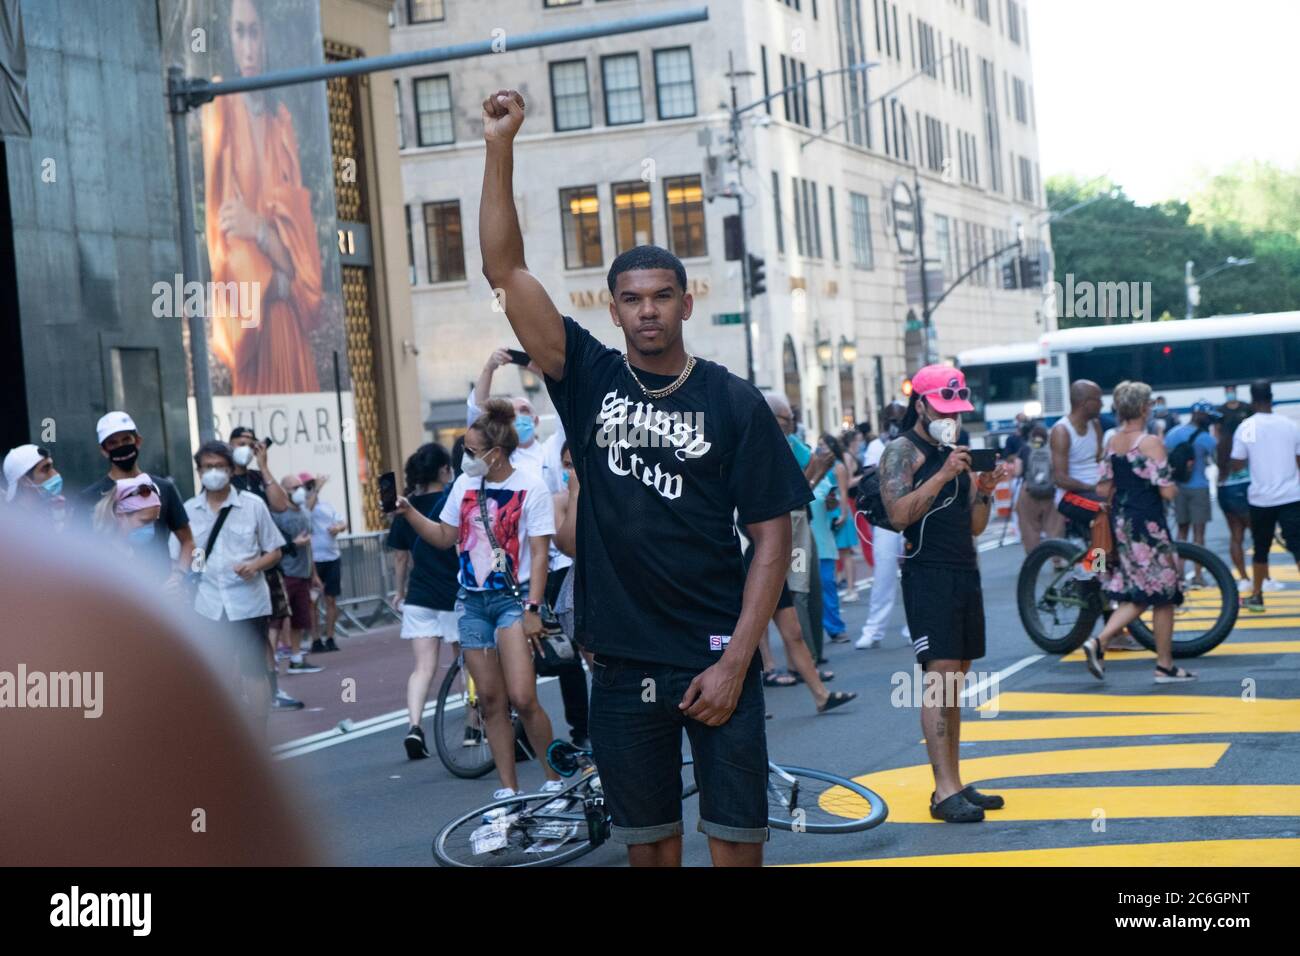 New York, United States. 08th July, 2020. A BLM protester holding up his fist for a picture in front of Trump Tower where a large Black Lives Matter mural was painted.As New York City enters phase 3 of reopening retail stores for indoor shopping, restaurants have been postponed for indoor dinning. Meanwhile Black Lives Matter protests continue in the city as the Mayor along with a group of people painted a large Black Lives Matter mural in front of Trump Tower on 5th Ave. Credit: SOPA Images Limited/Alamy Live News Stock Photo